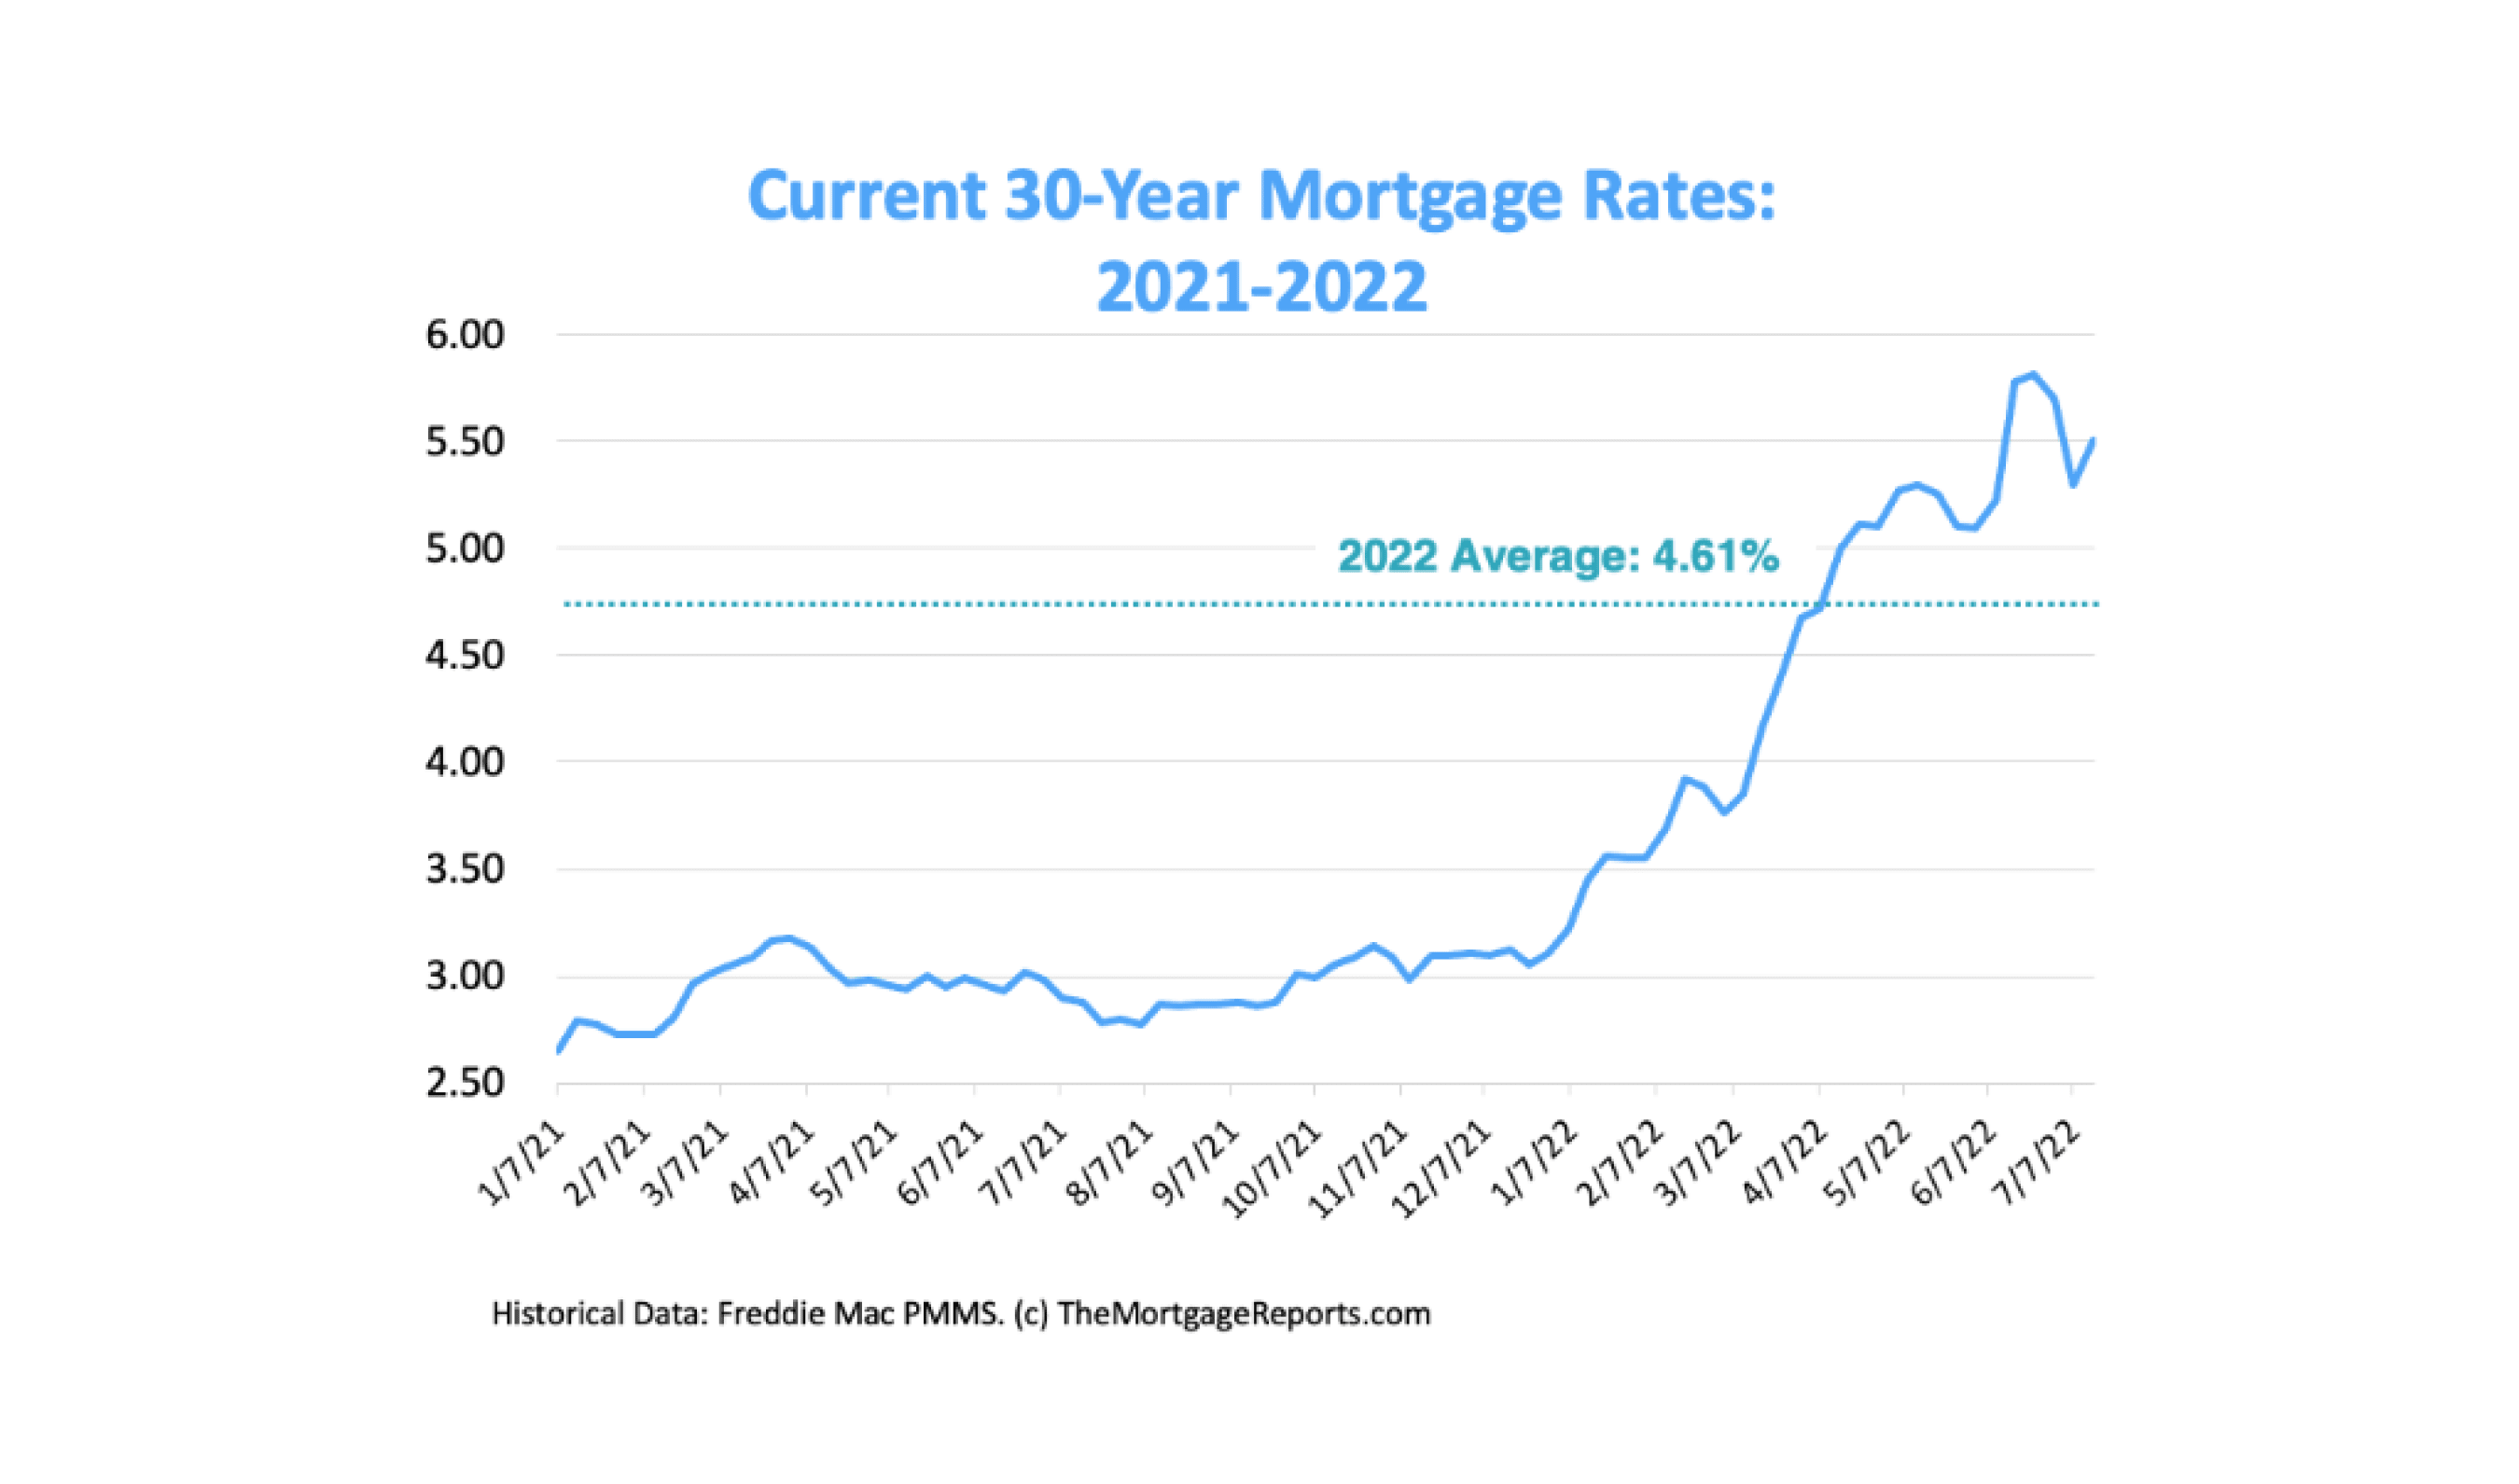 Line graph showing rising current 30-year mortgage rates between 2021 and 2022.